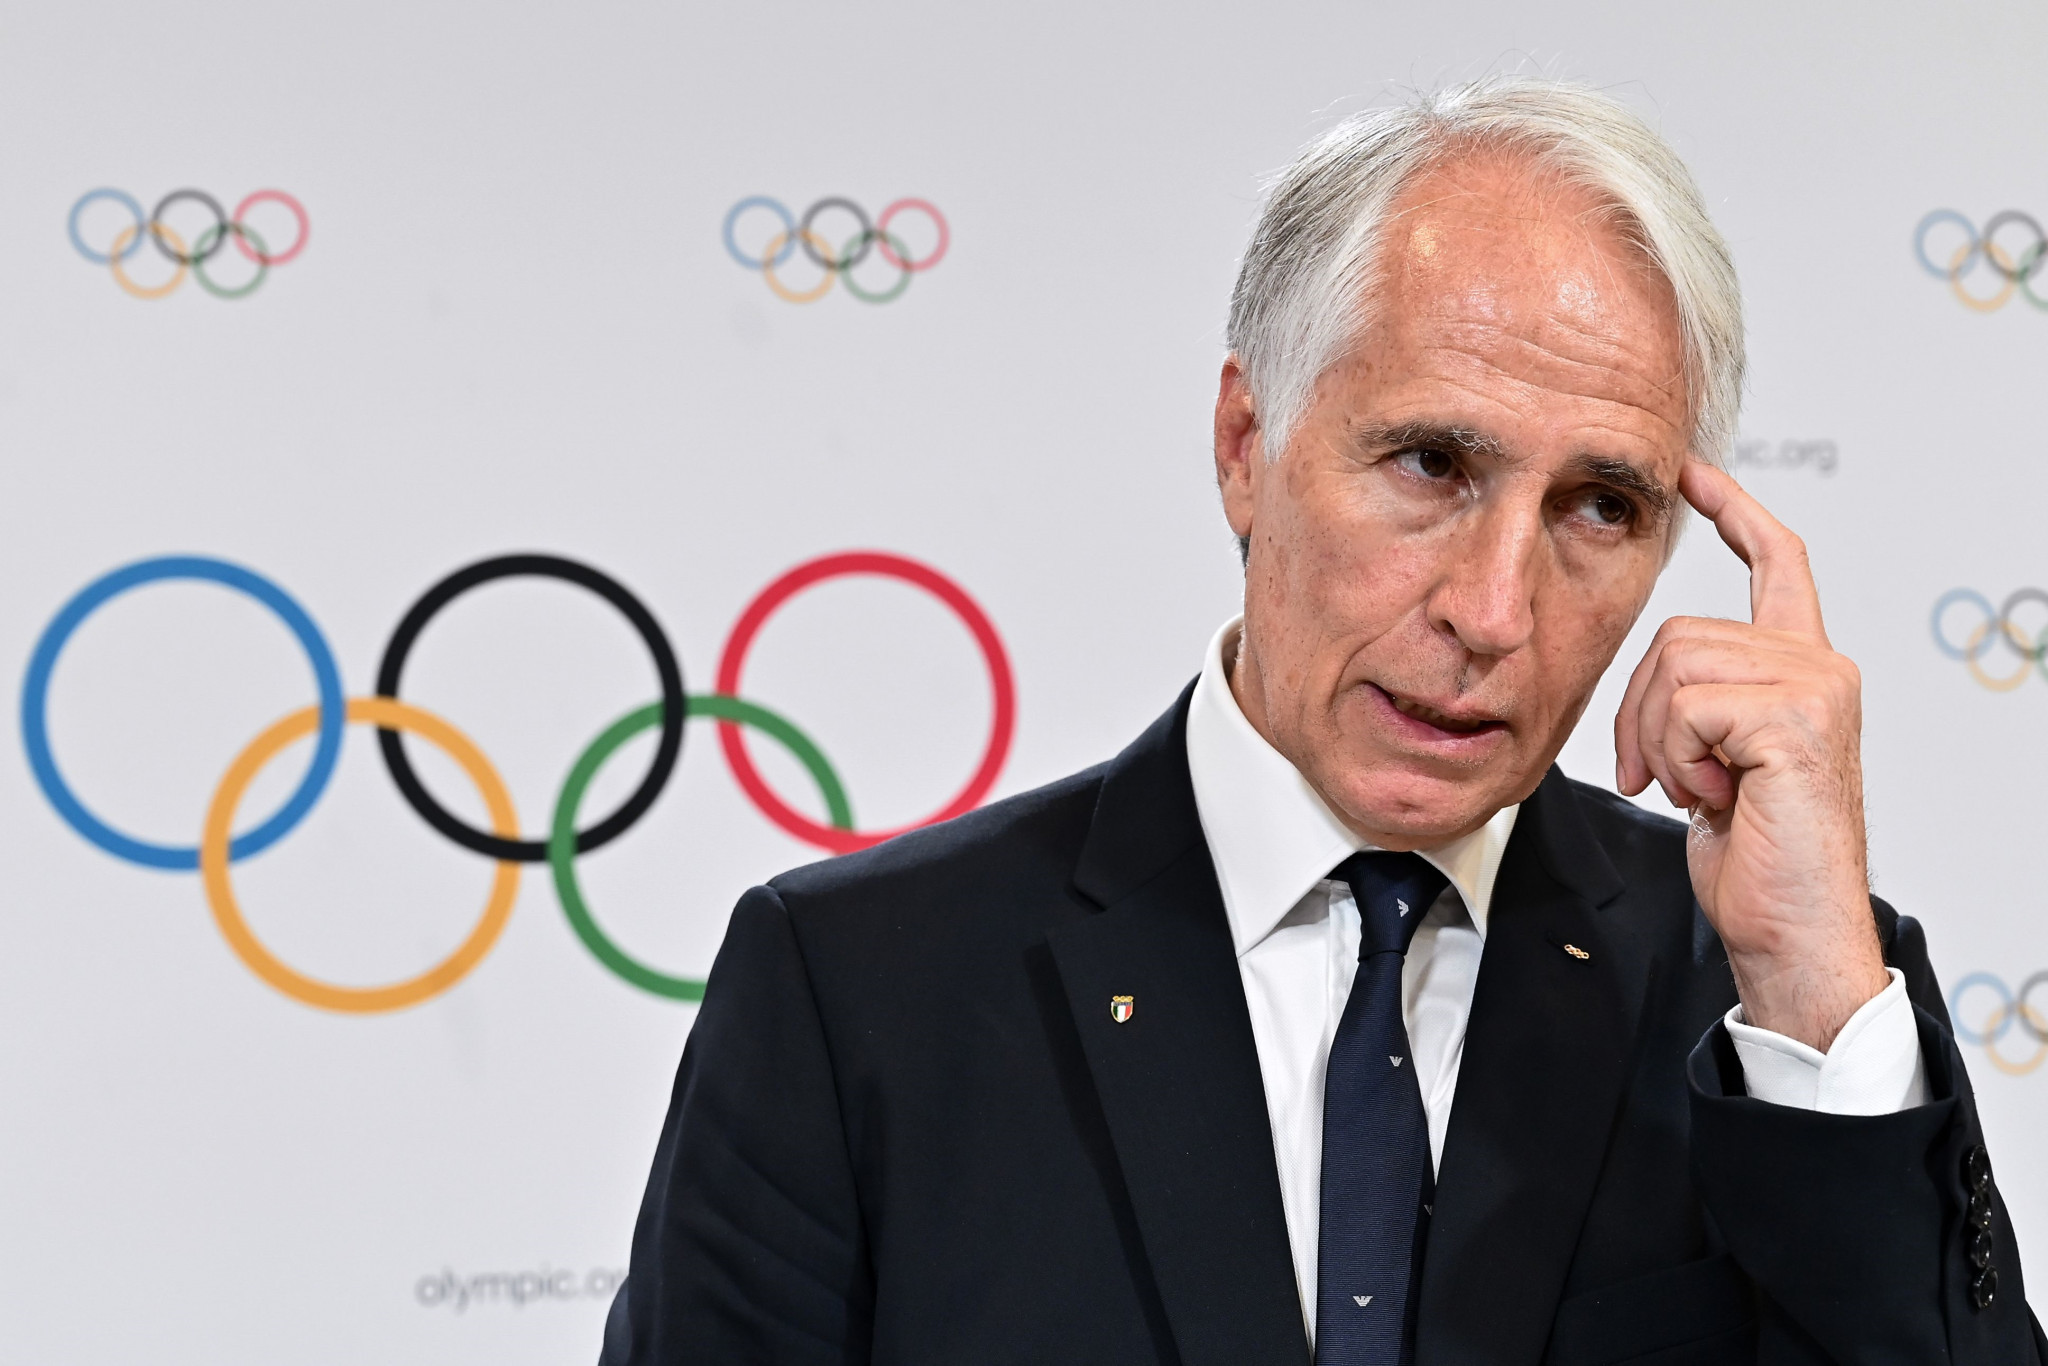 Milan Cortina 2026 President and IOC member Giovanni Malagò stressed the need for "continuity" ©Getty Images